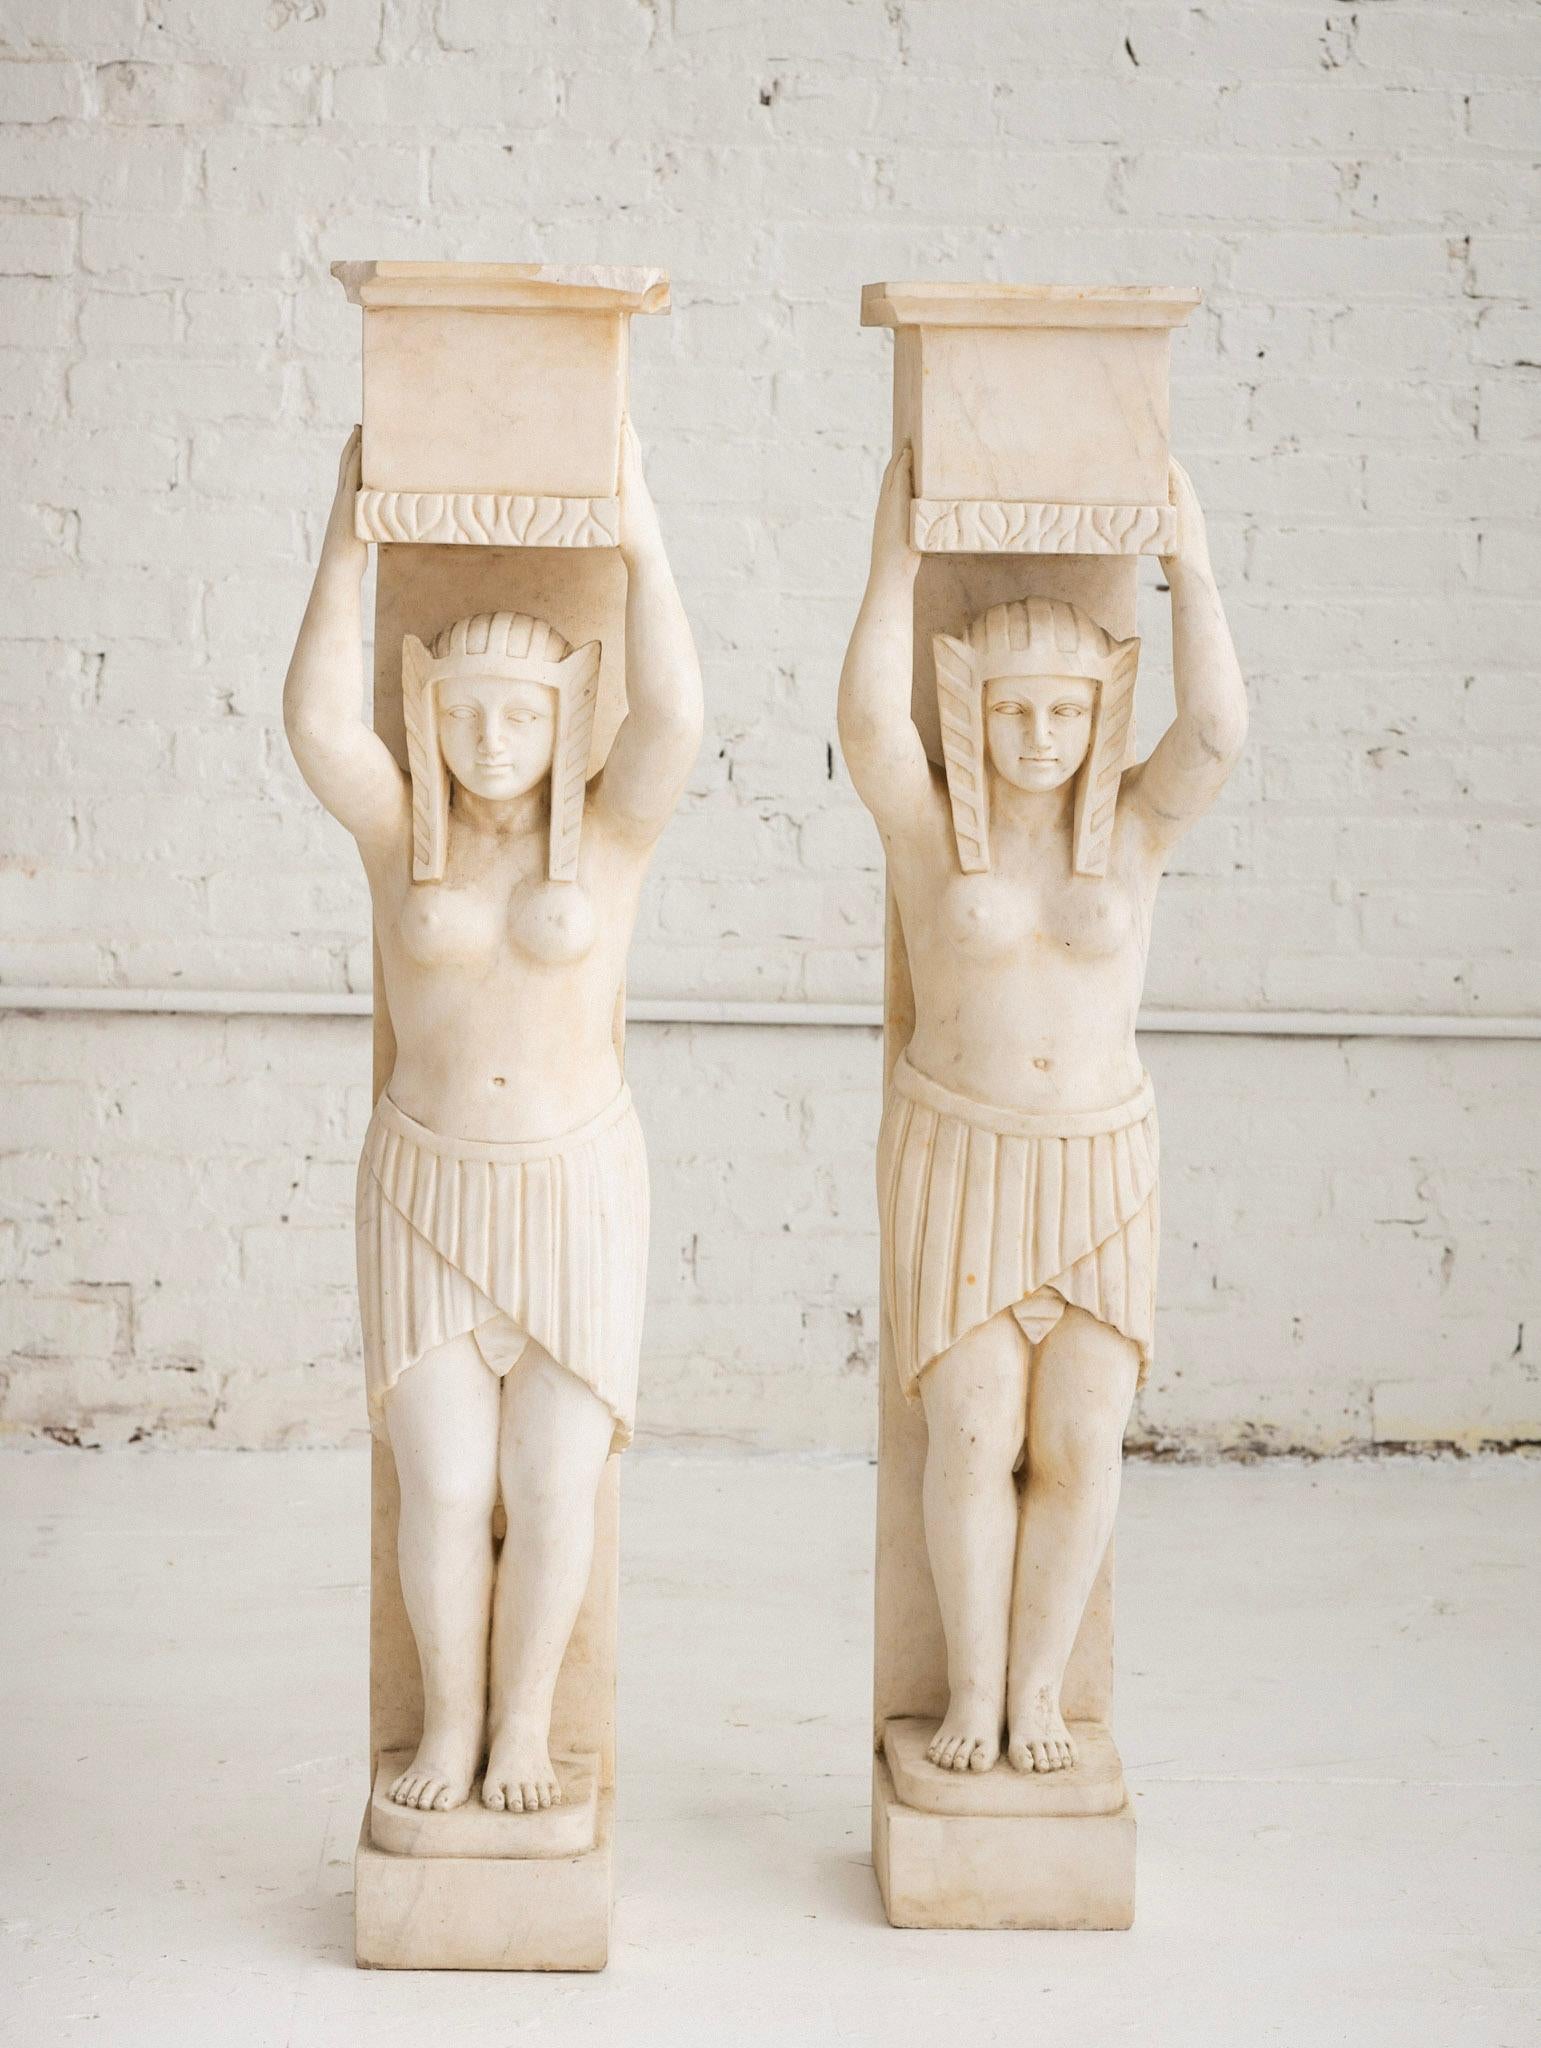 Pair of antique fireplace surrounds carved of solid white marble into two female Egyptian style figures. Unfinished backs and top surface. As architectural salvage, these may be repurposed as pedestals, plant stands or simply objet d’art. Dimensions